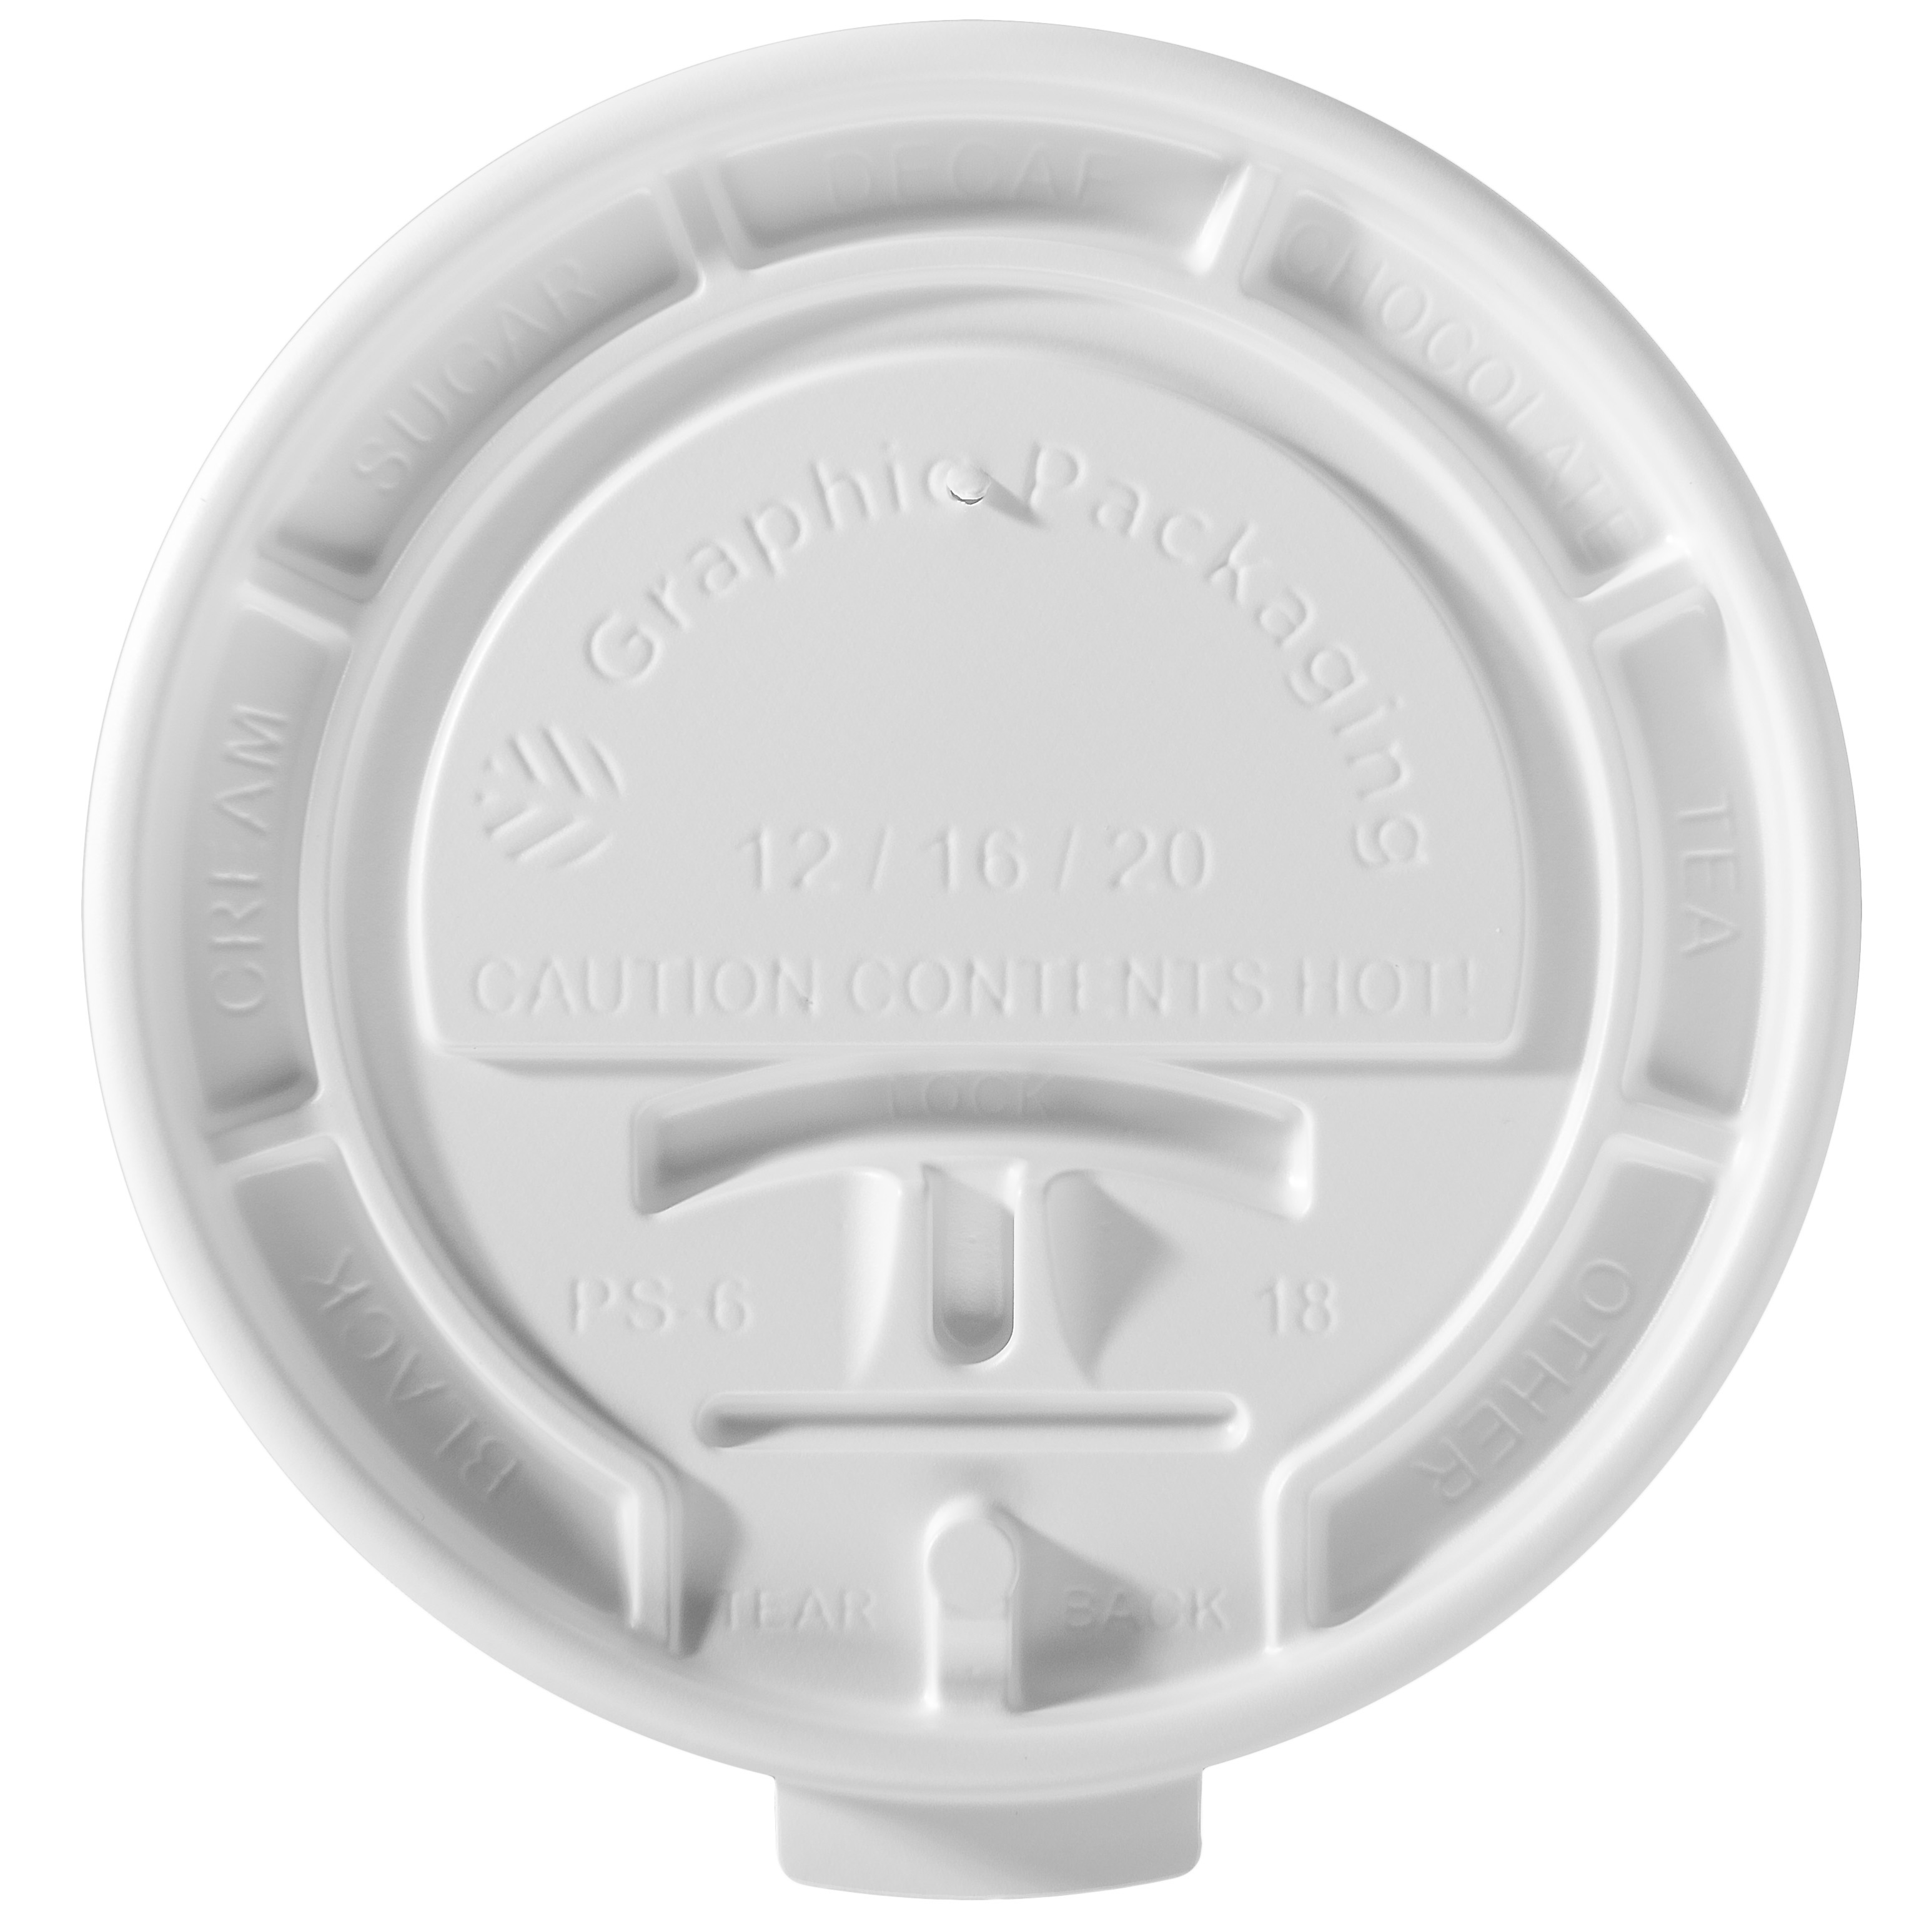 Graphic Packaging 332603044 Ecotainer™ Polystyrene 16/32 Oz